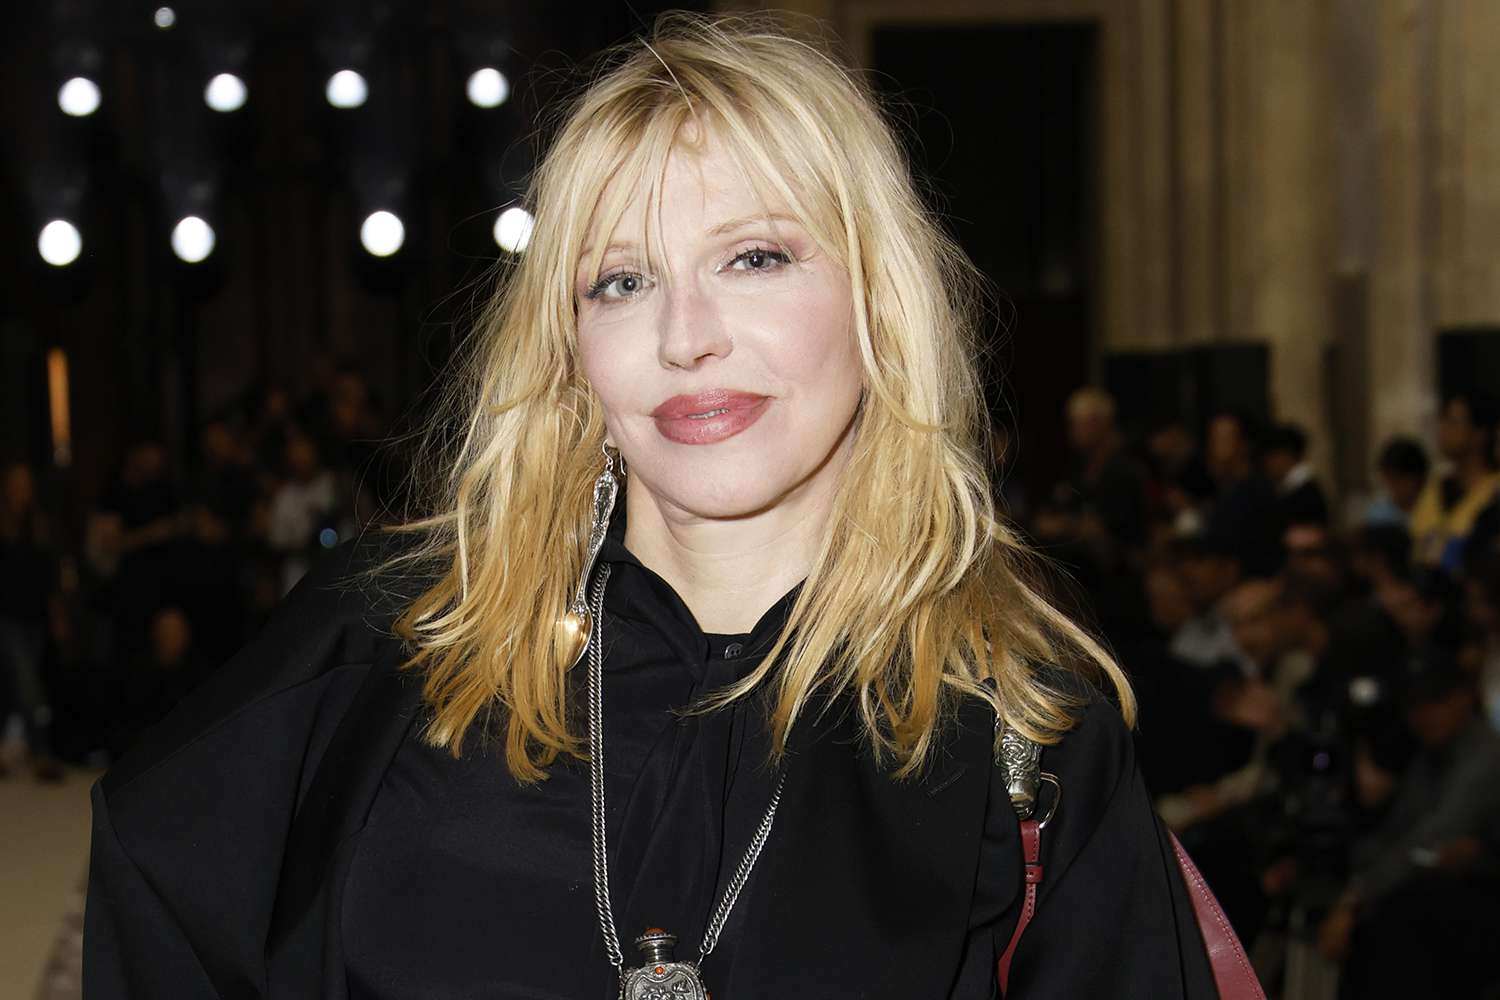 Famous People With Autism Spectrum Disorder - Courtney Love - Singer & Actress